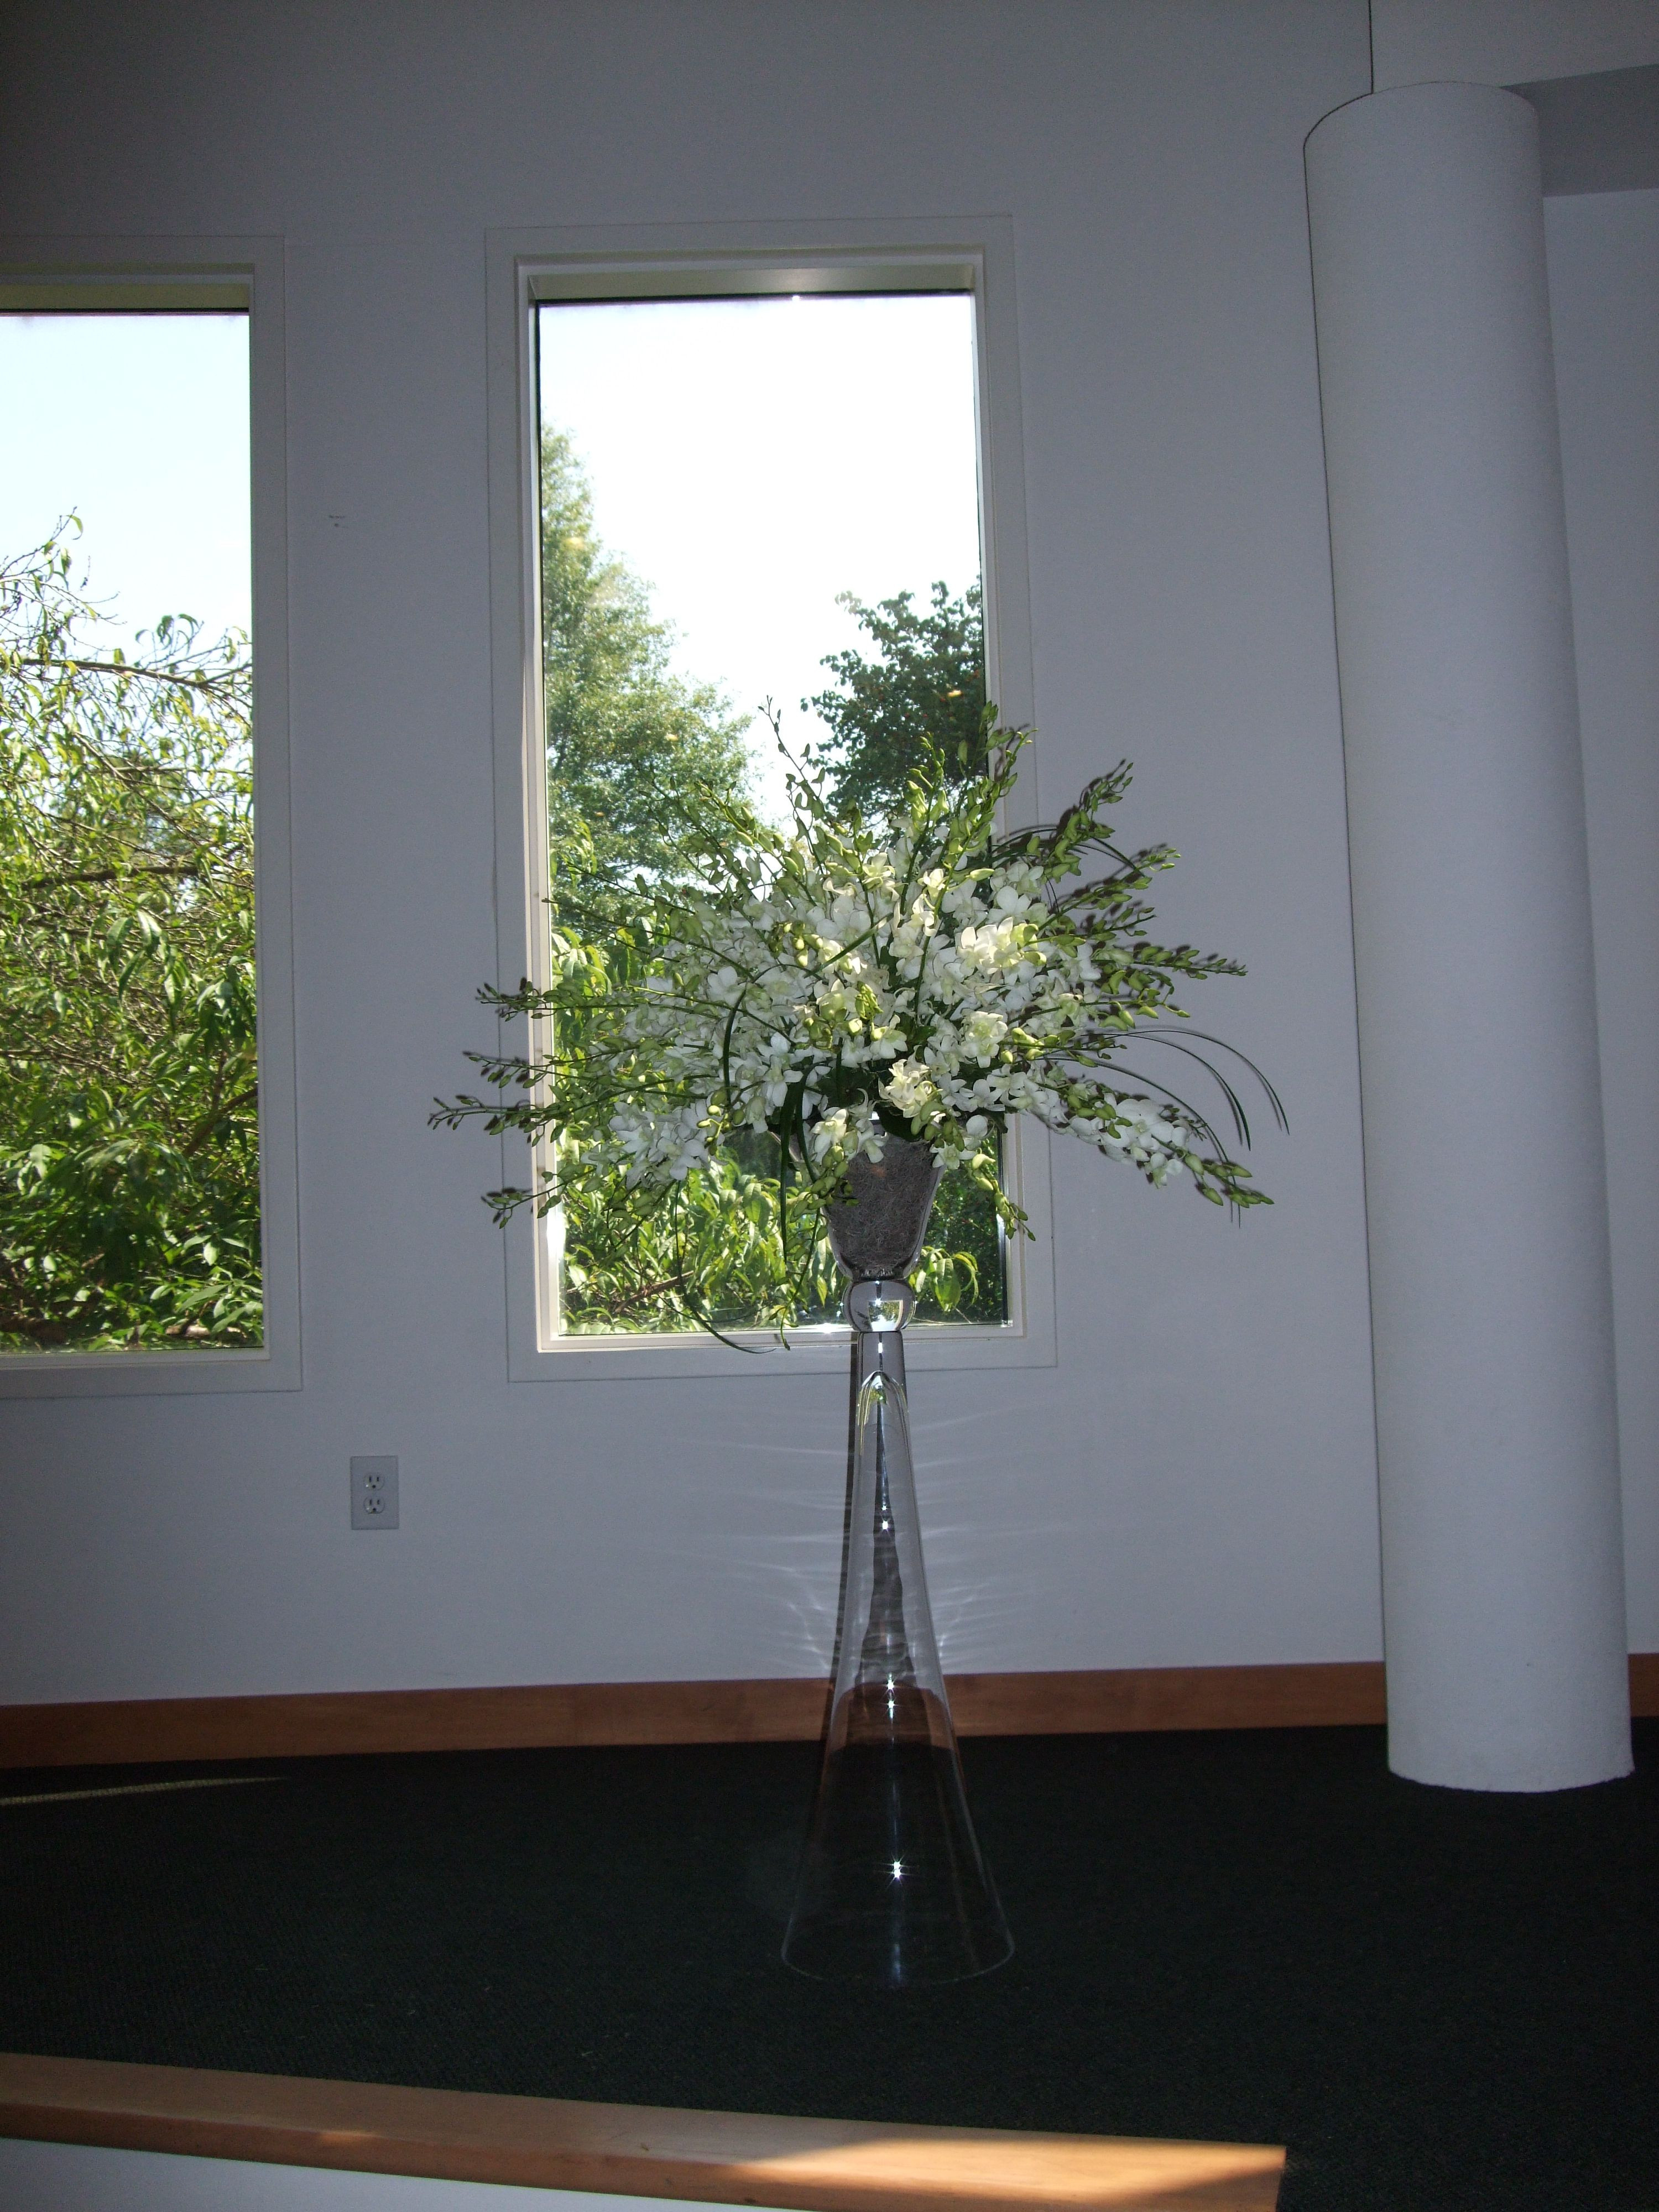 26 Perfect Cheap Tall Trumpet Vases 2024 free download cheap tall trumpet vases of yom kippur bimah arrangment designed in a tall glass trumpet vase in yom kippur bimah arrangment designed in a tall glass trumpet vase with white hawaiian dendrob